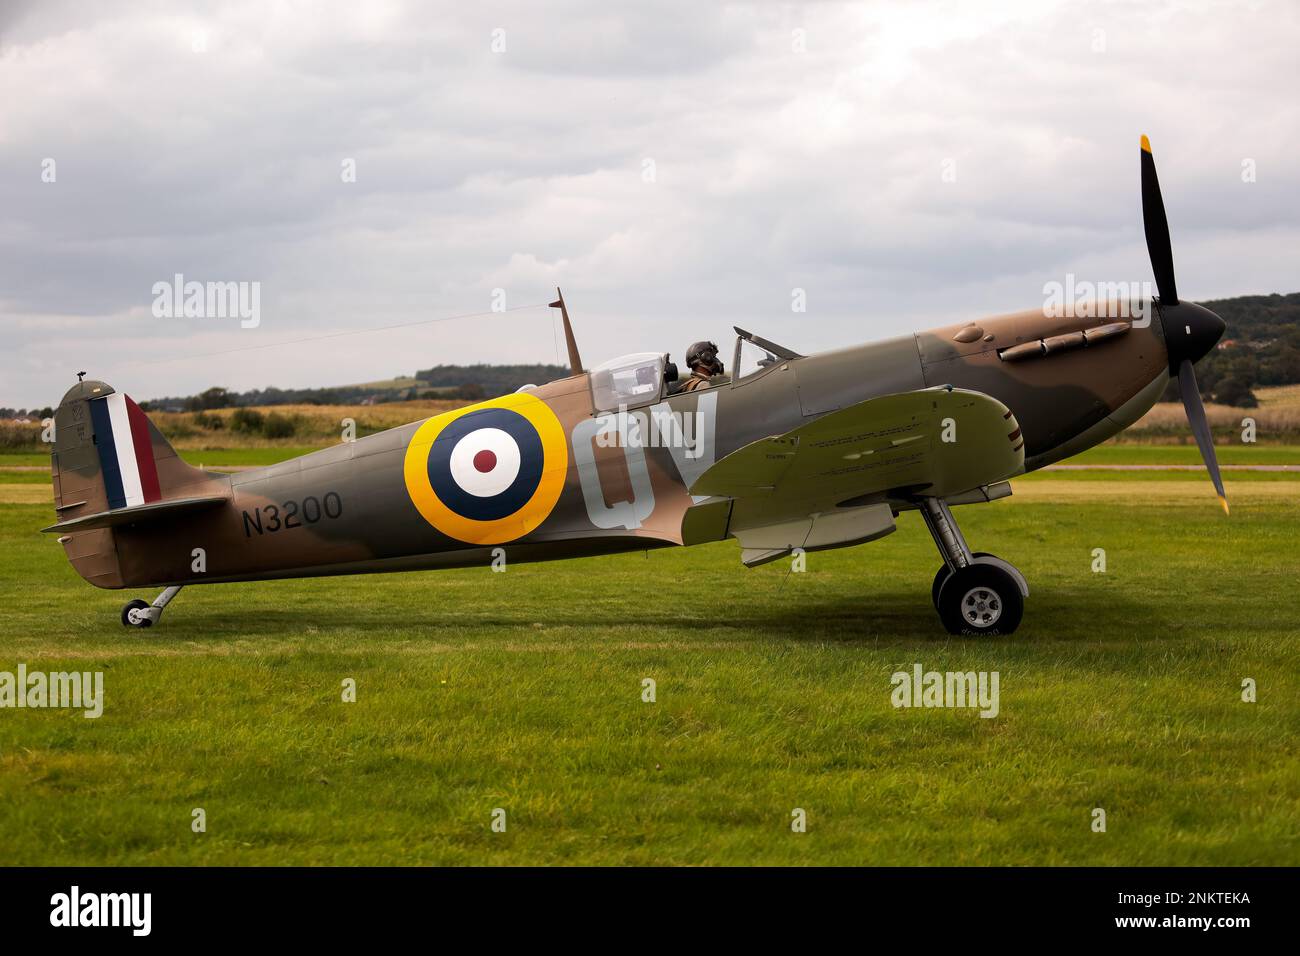 This is the Supermarine Spitfire Ia P9374 which served wtith the RAF during the Battle of Britain. The display was at Shoreham Airshow, Shoreham Airport, East Sussex, UK. 30th August 2014 Stock Photo